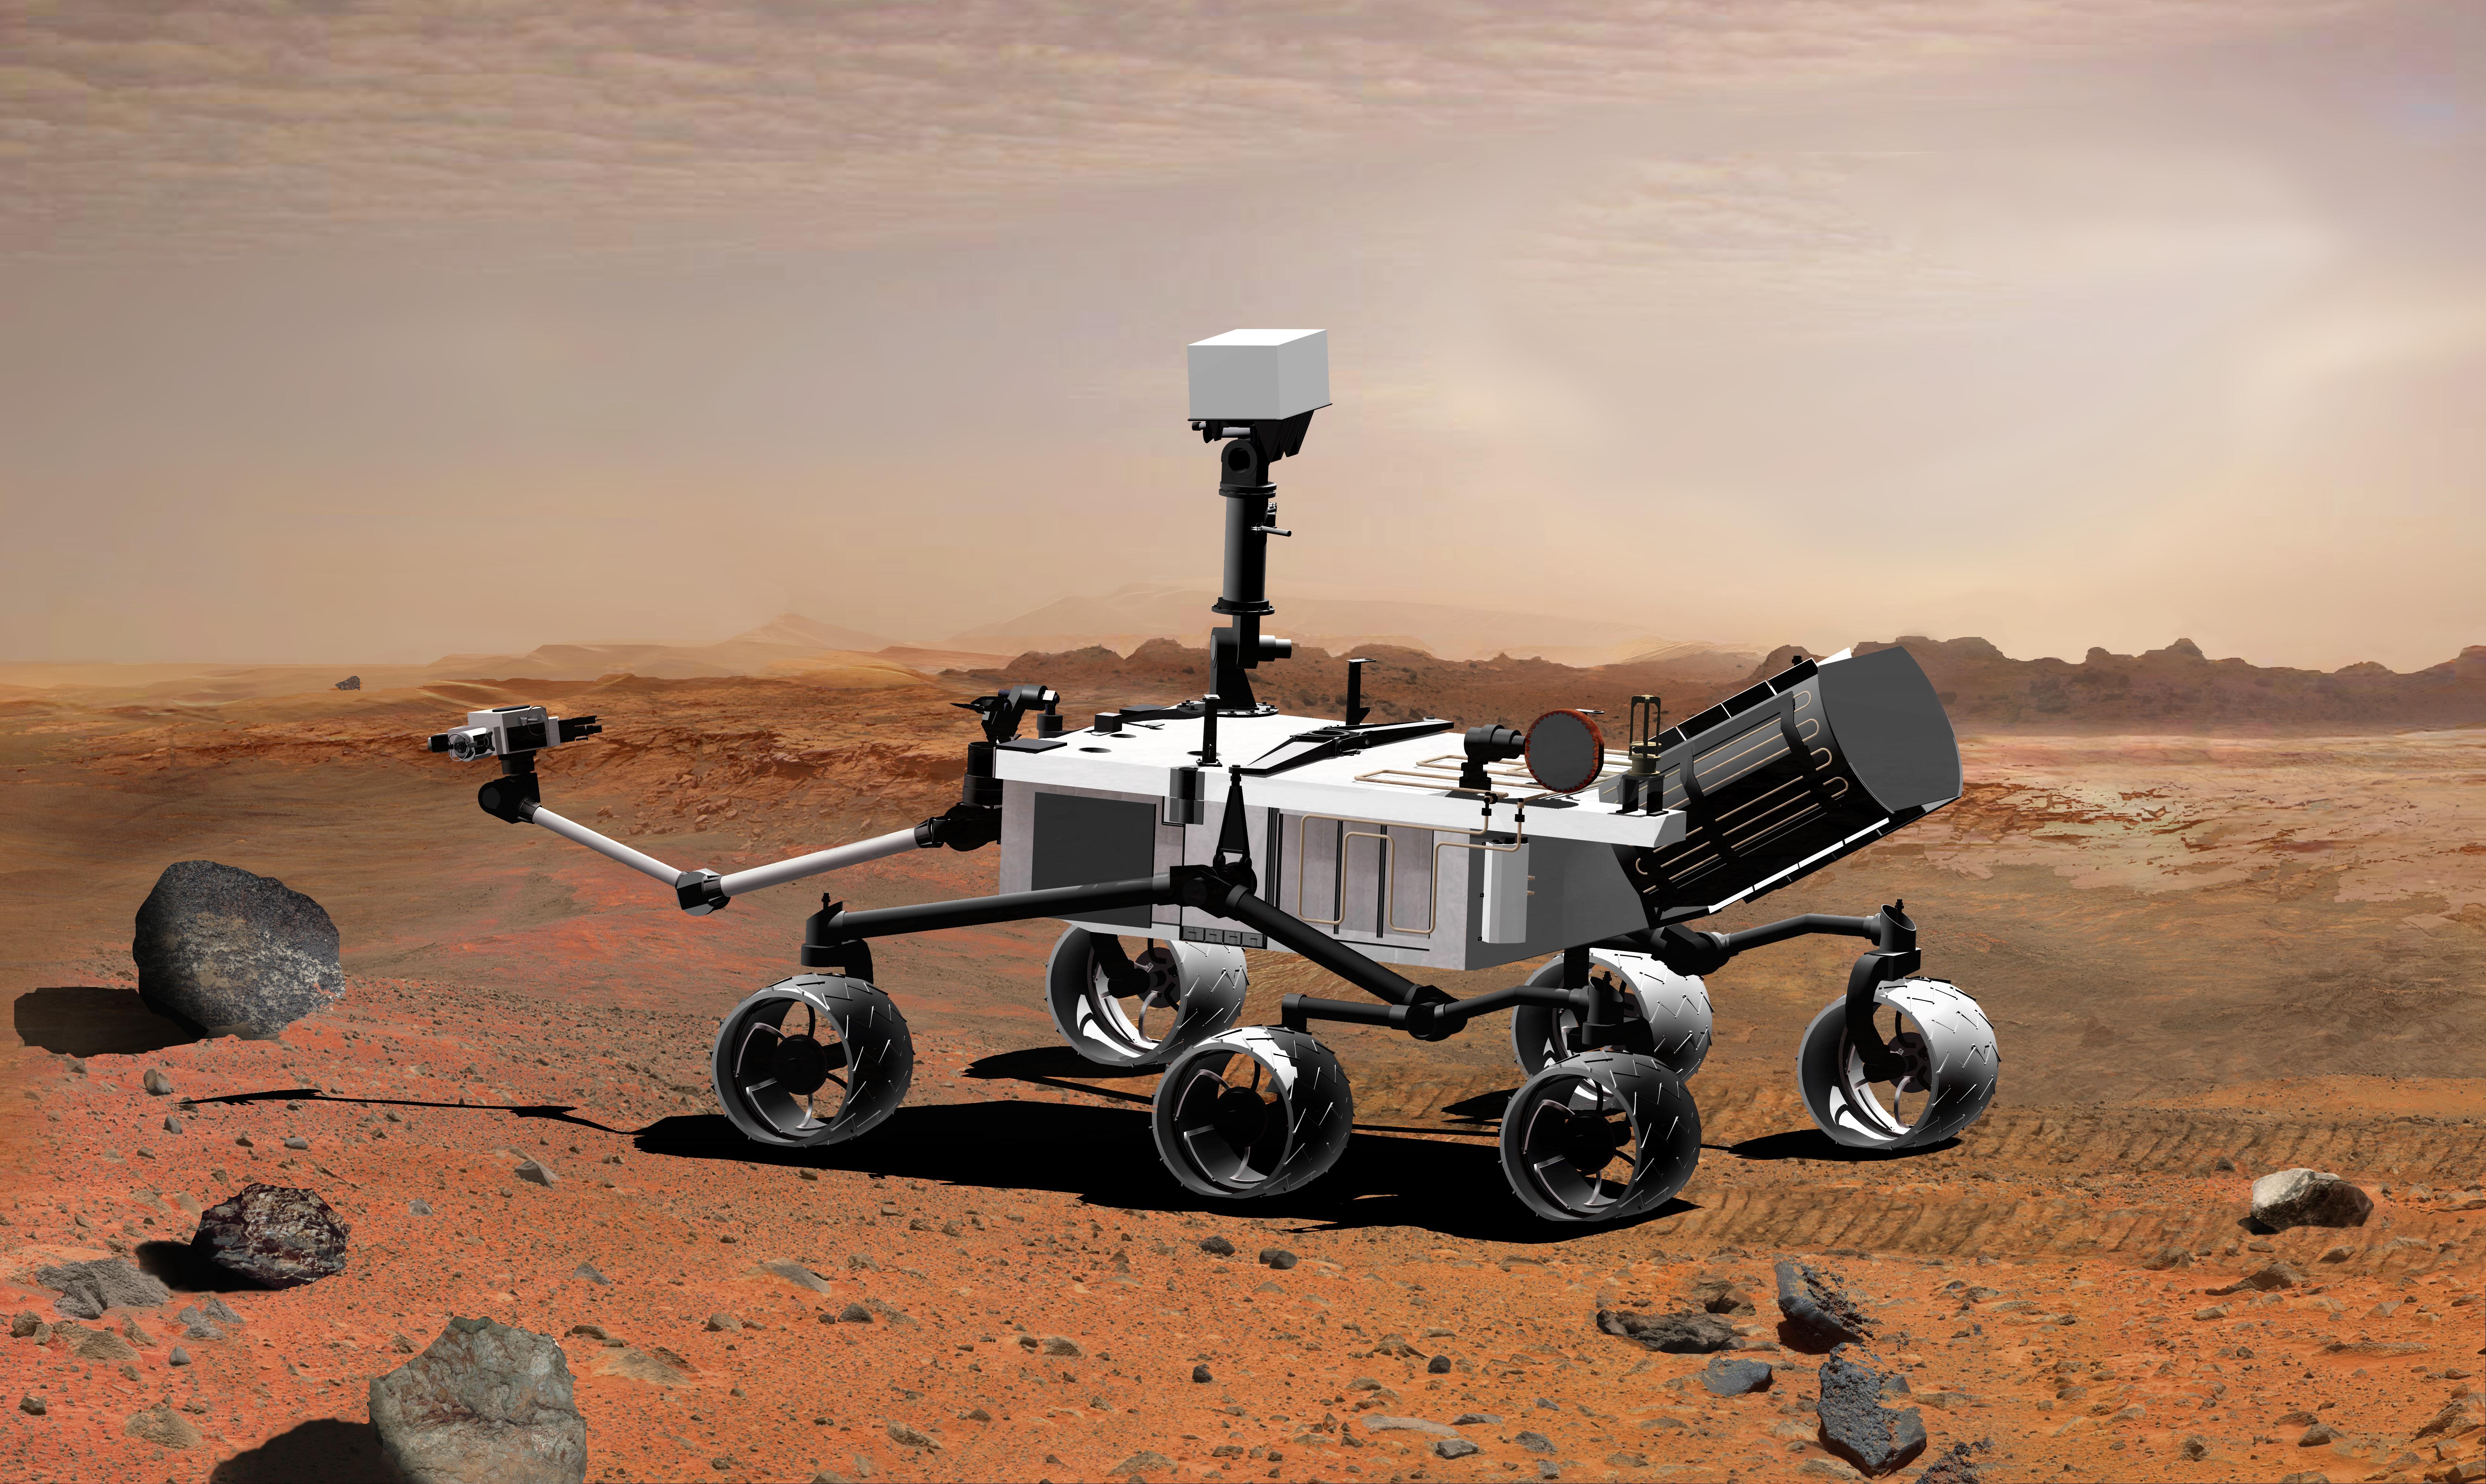 Mars Curiosity: Facts and Information